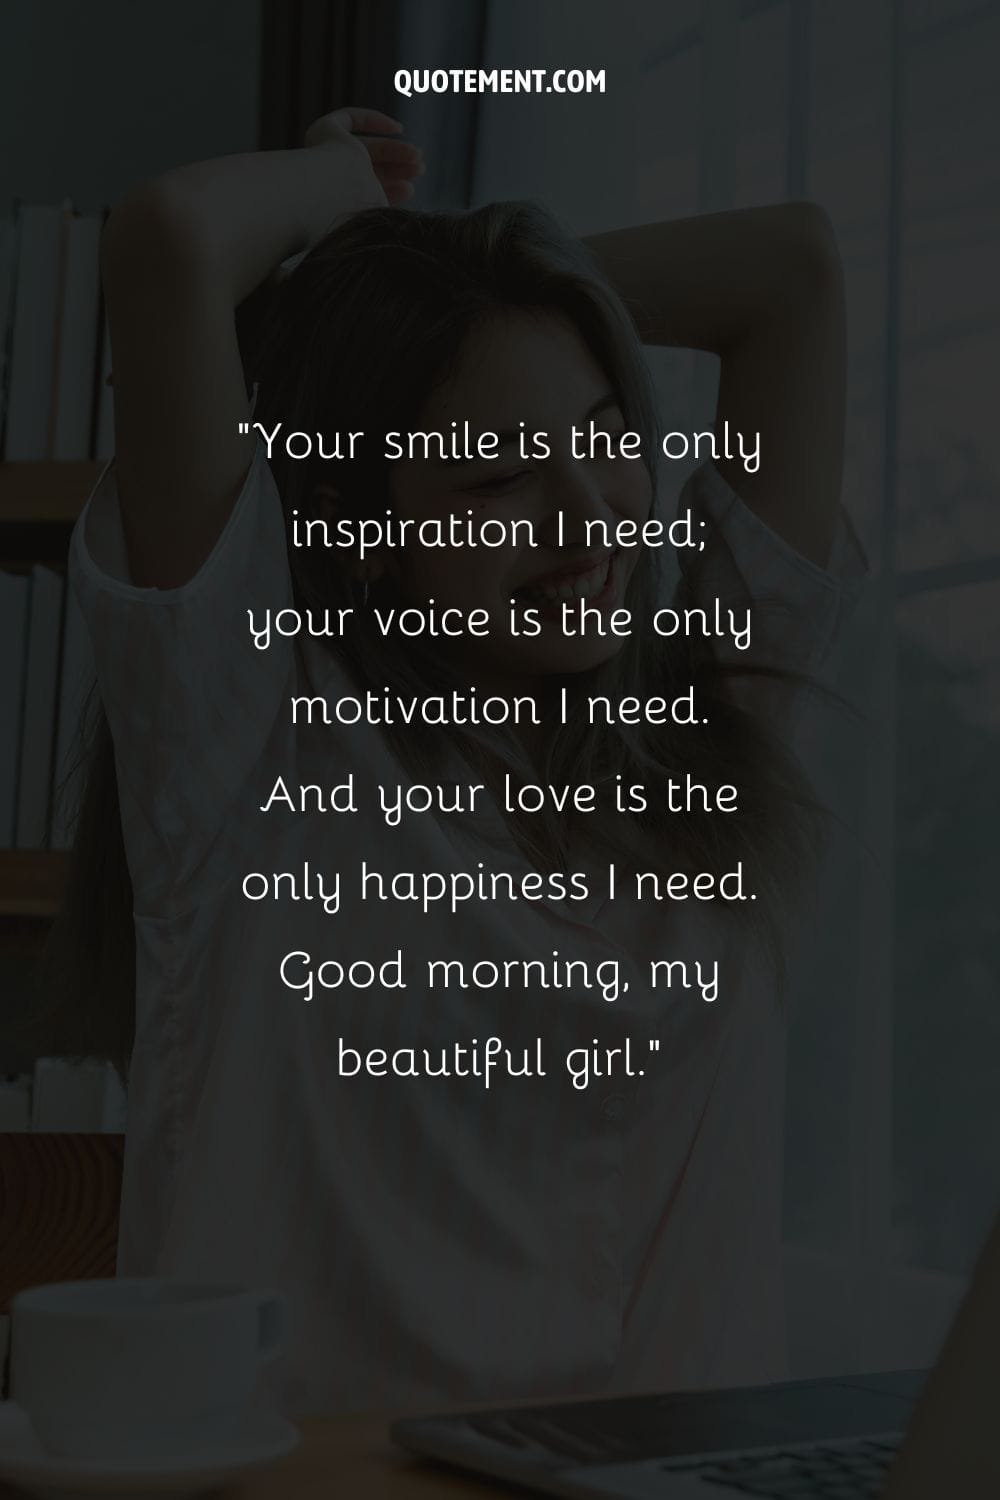 Your smile is the only inspiration I need; your voice is the only motivation I need